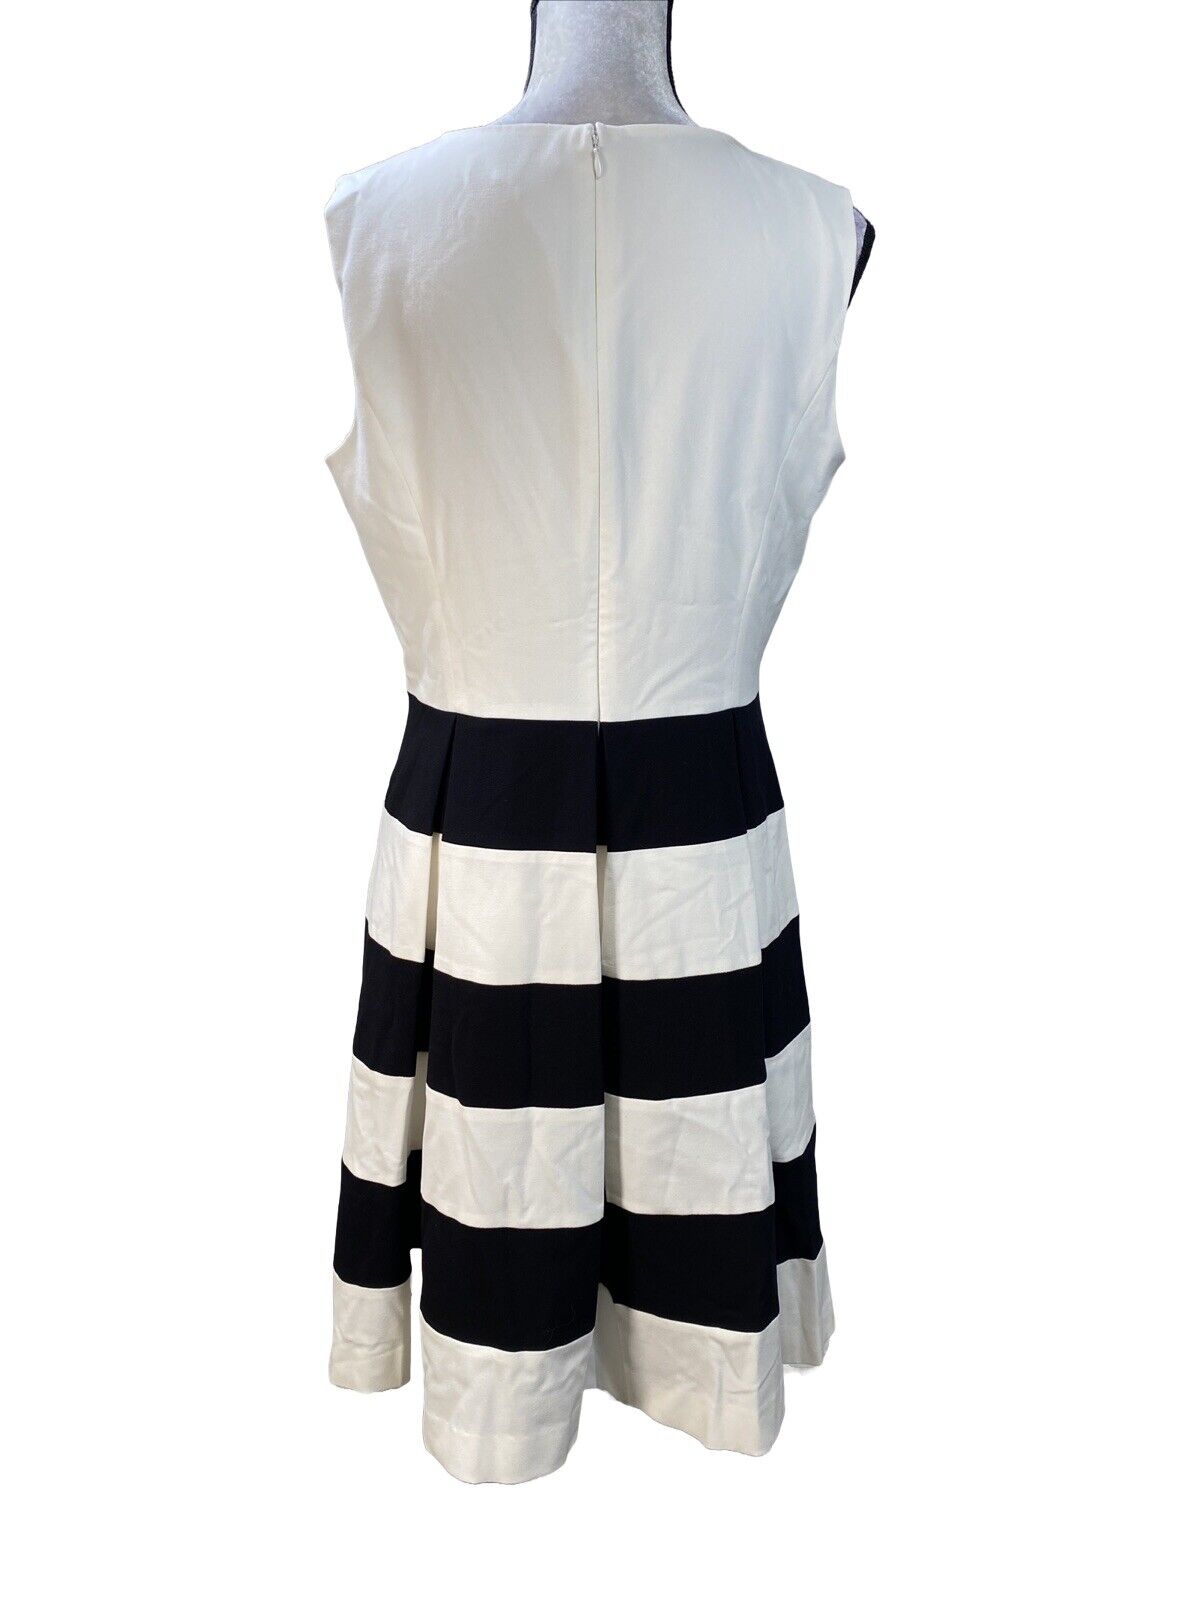 Nine West Women's White/Black Striped Fit and Flare Dress - 10